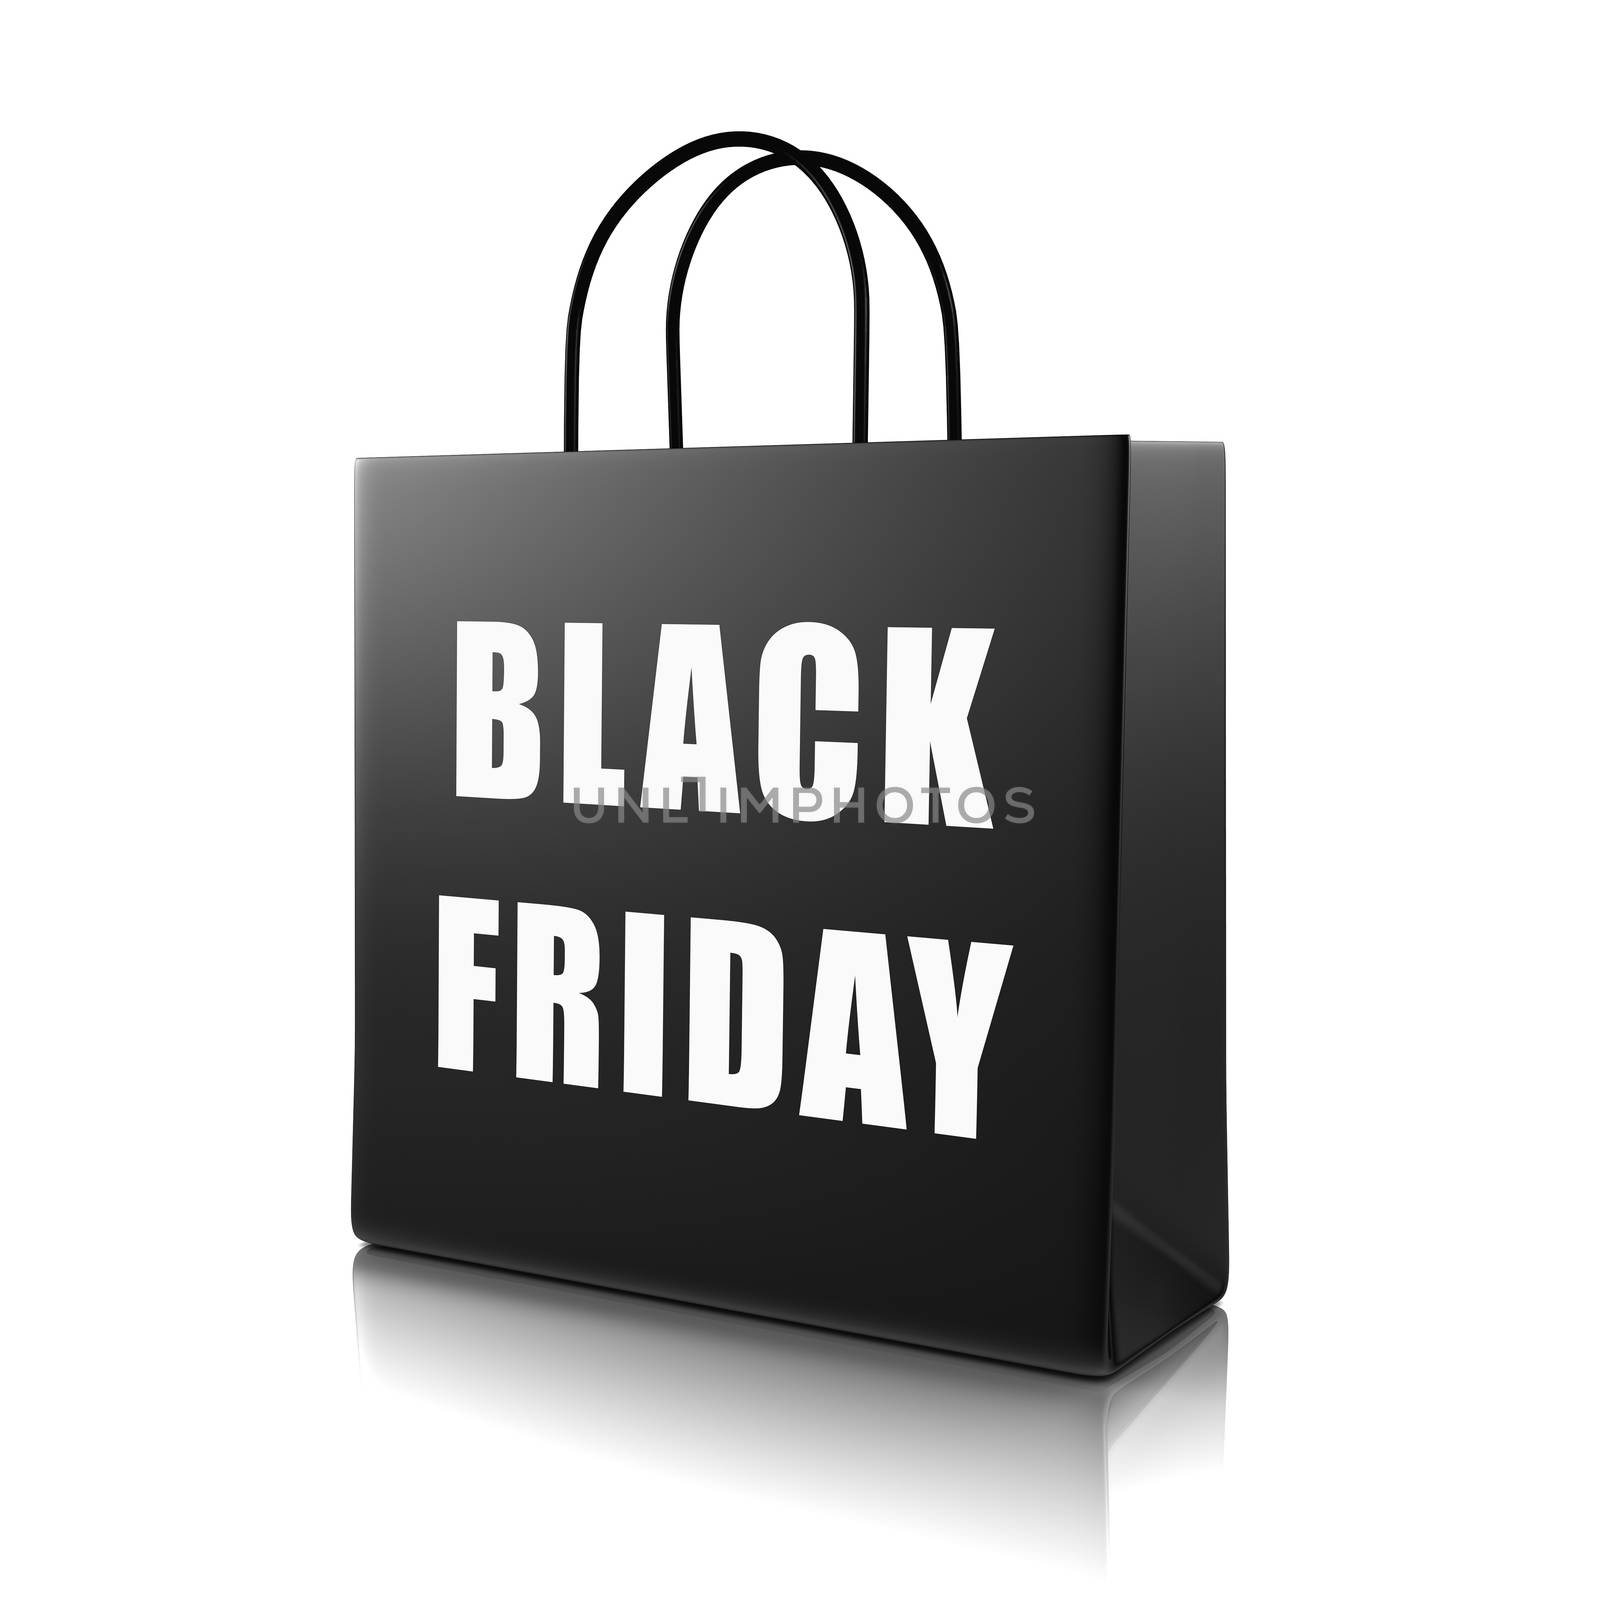 Black Shopping Bag with White Black Friday Text Isolated on White Background 3D Illustration